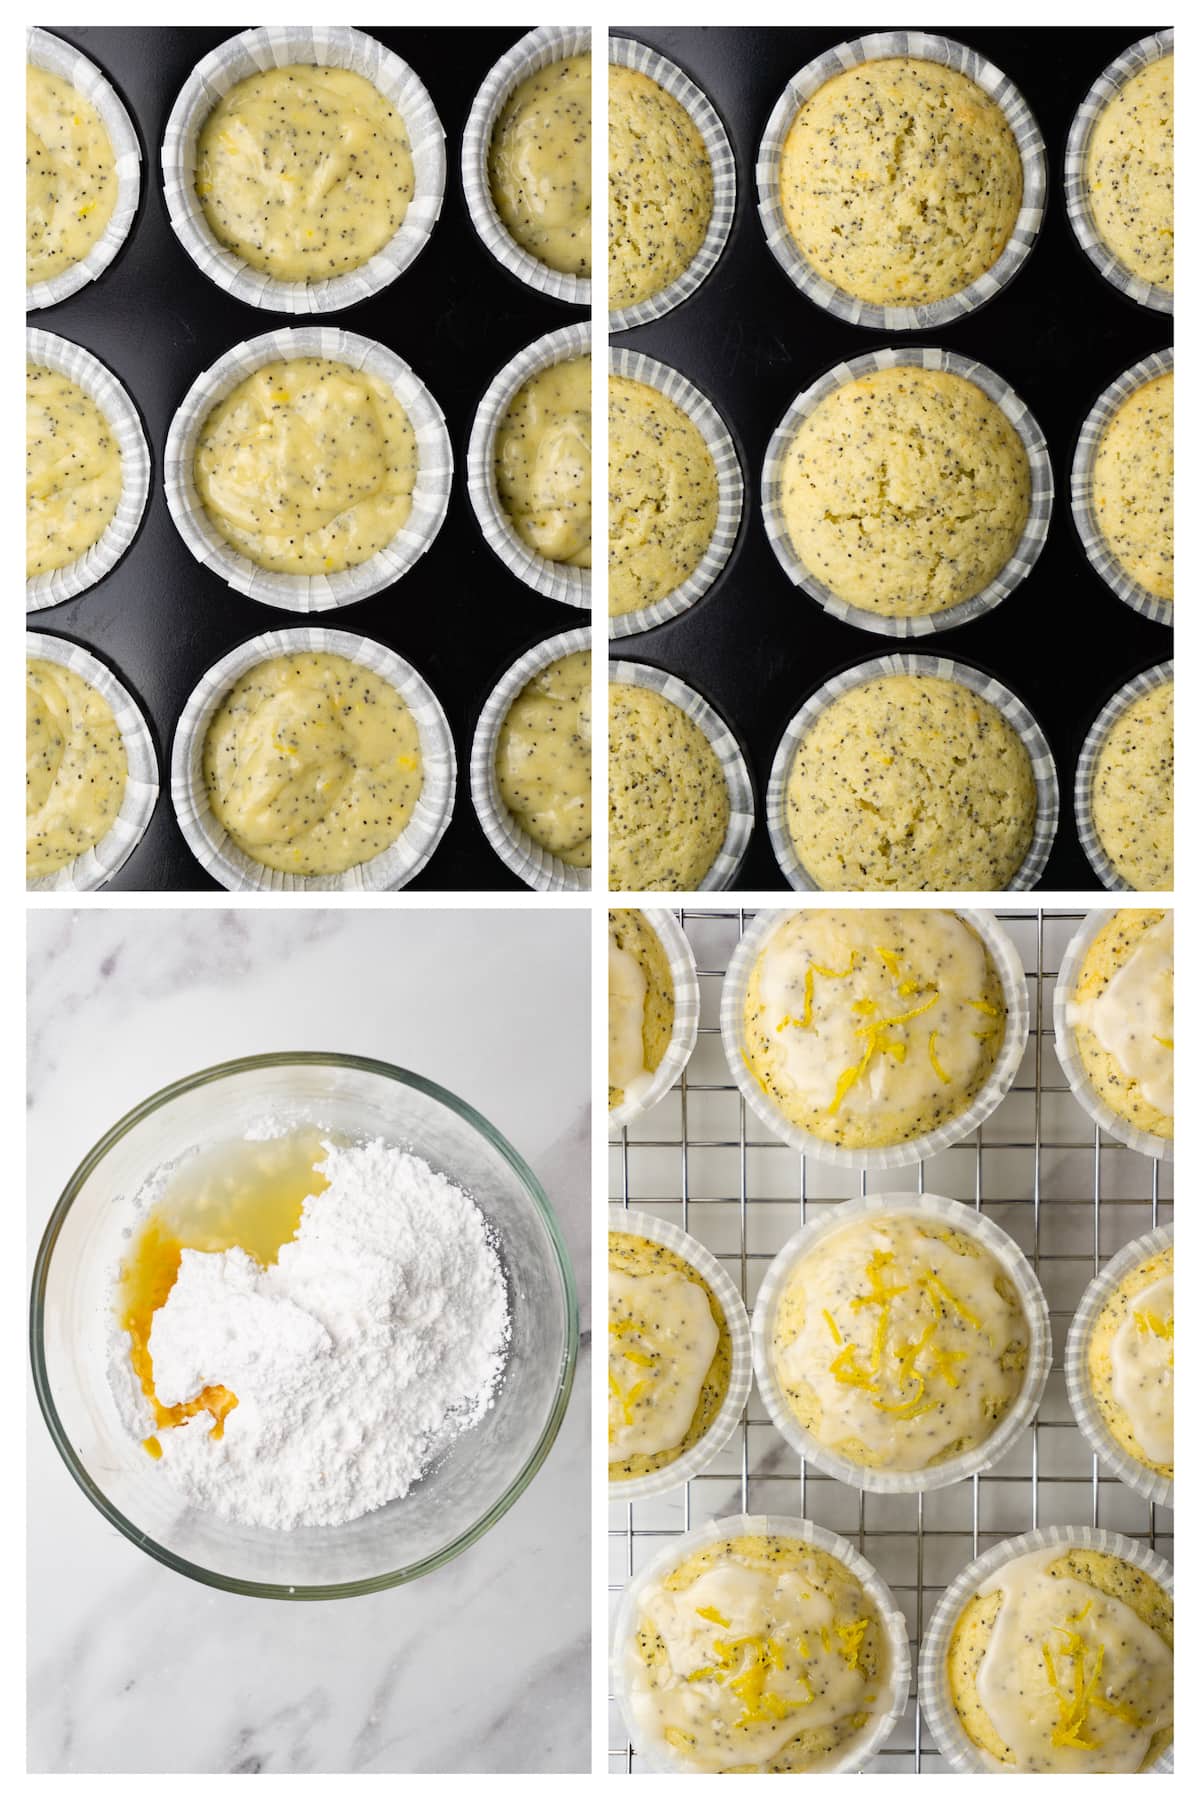 The collage image shows four steps to bake lemon poppy seed muffins and glaze them with simple sugar icing.